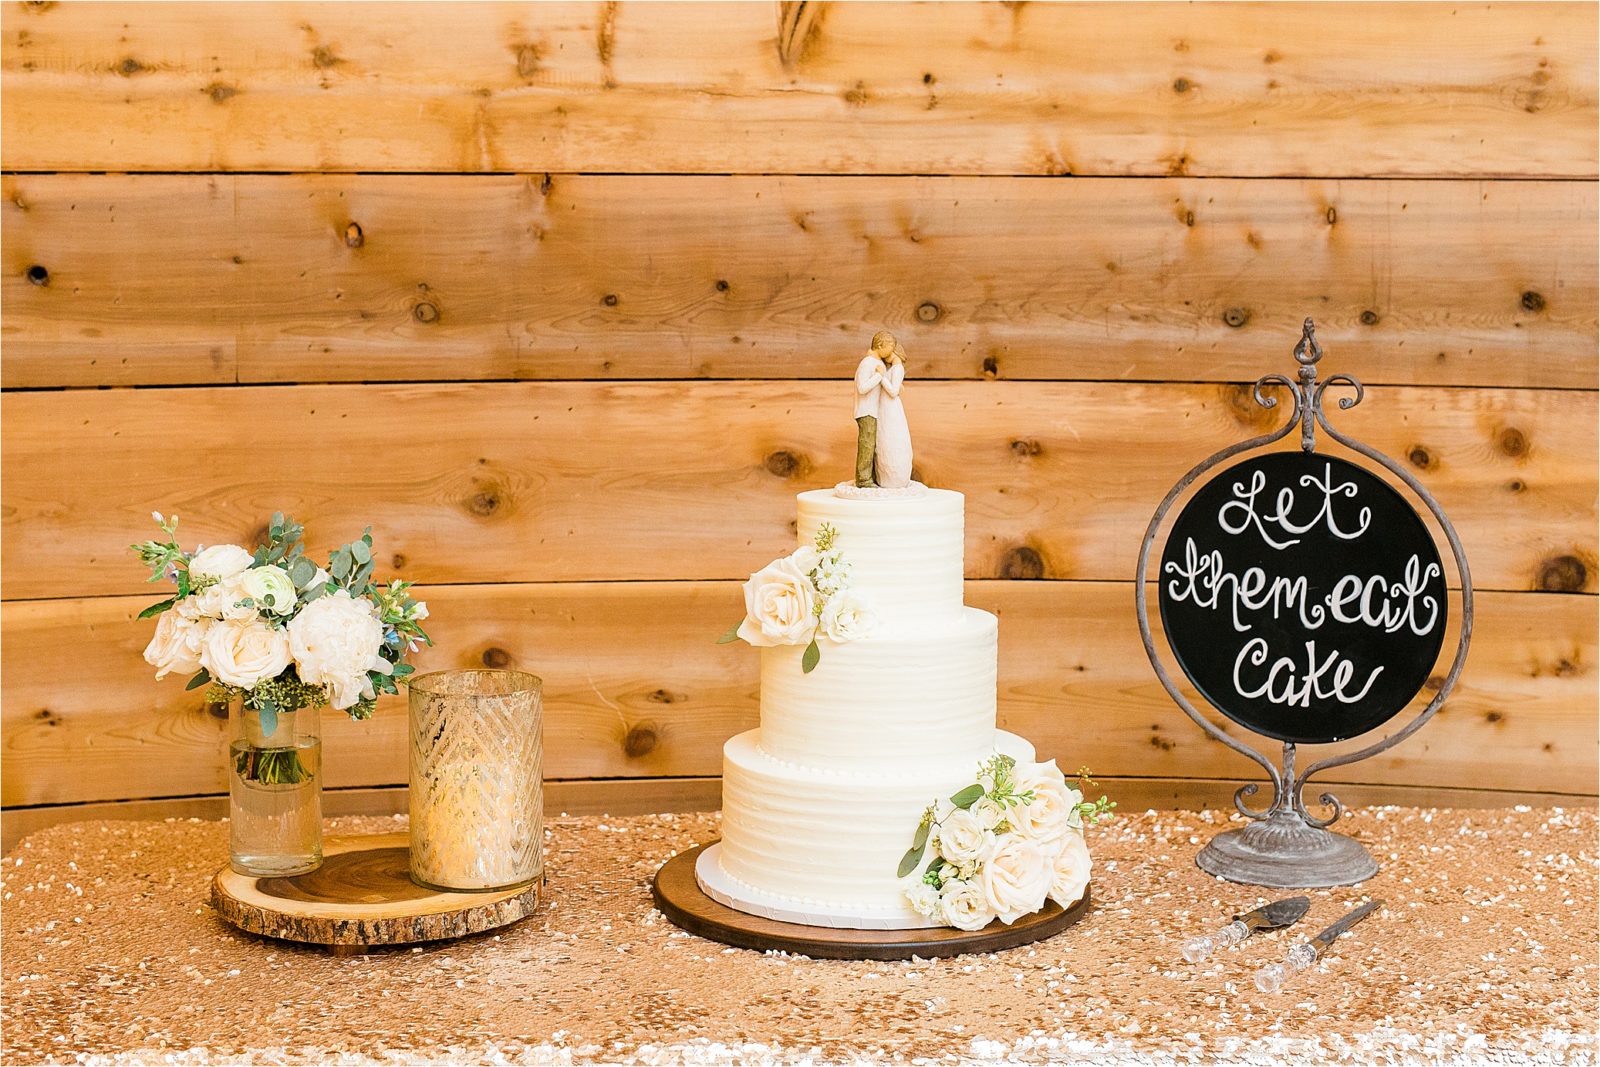 Let's eat cake sign and a traditional wedding cake by Baker Mama at Rustic Grace Estate in Van Alstyne, Texas 